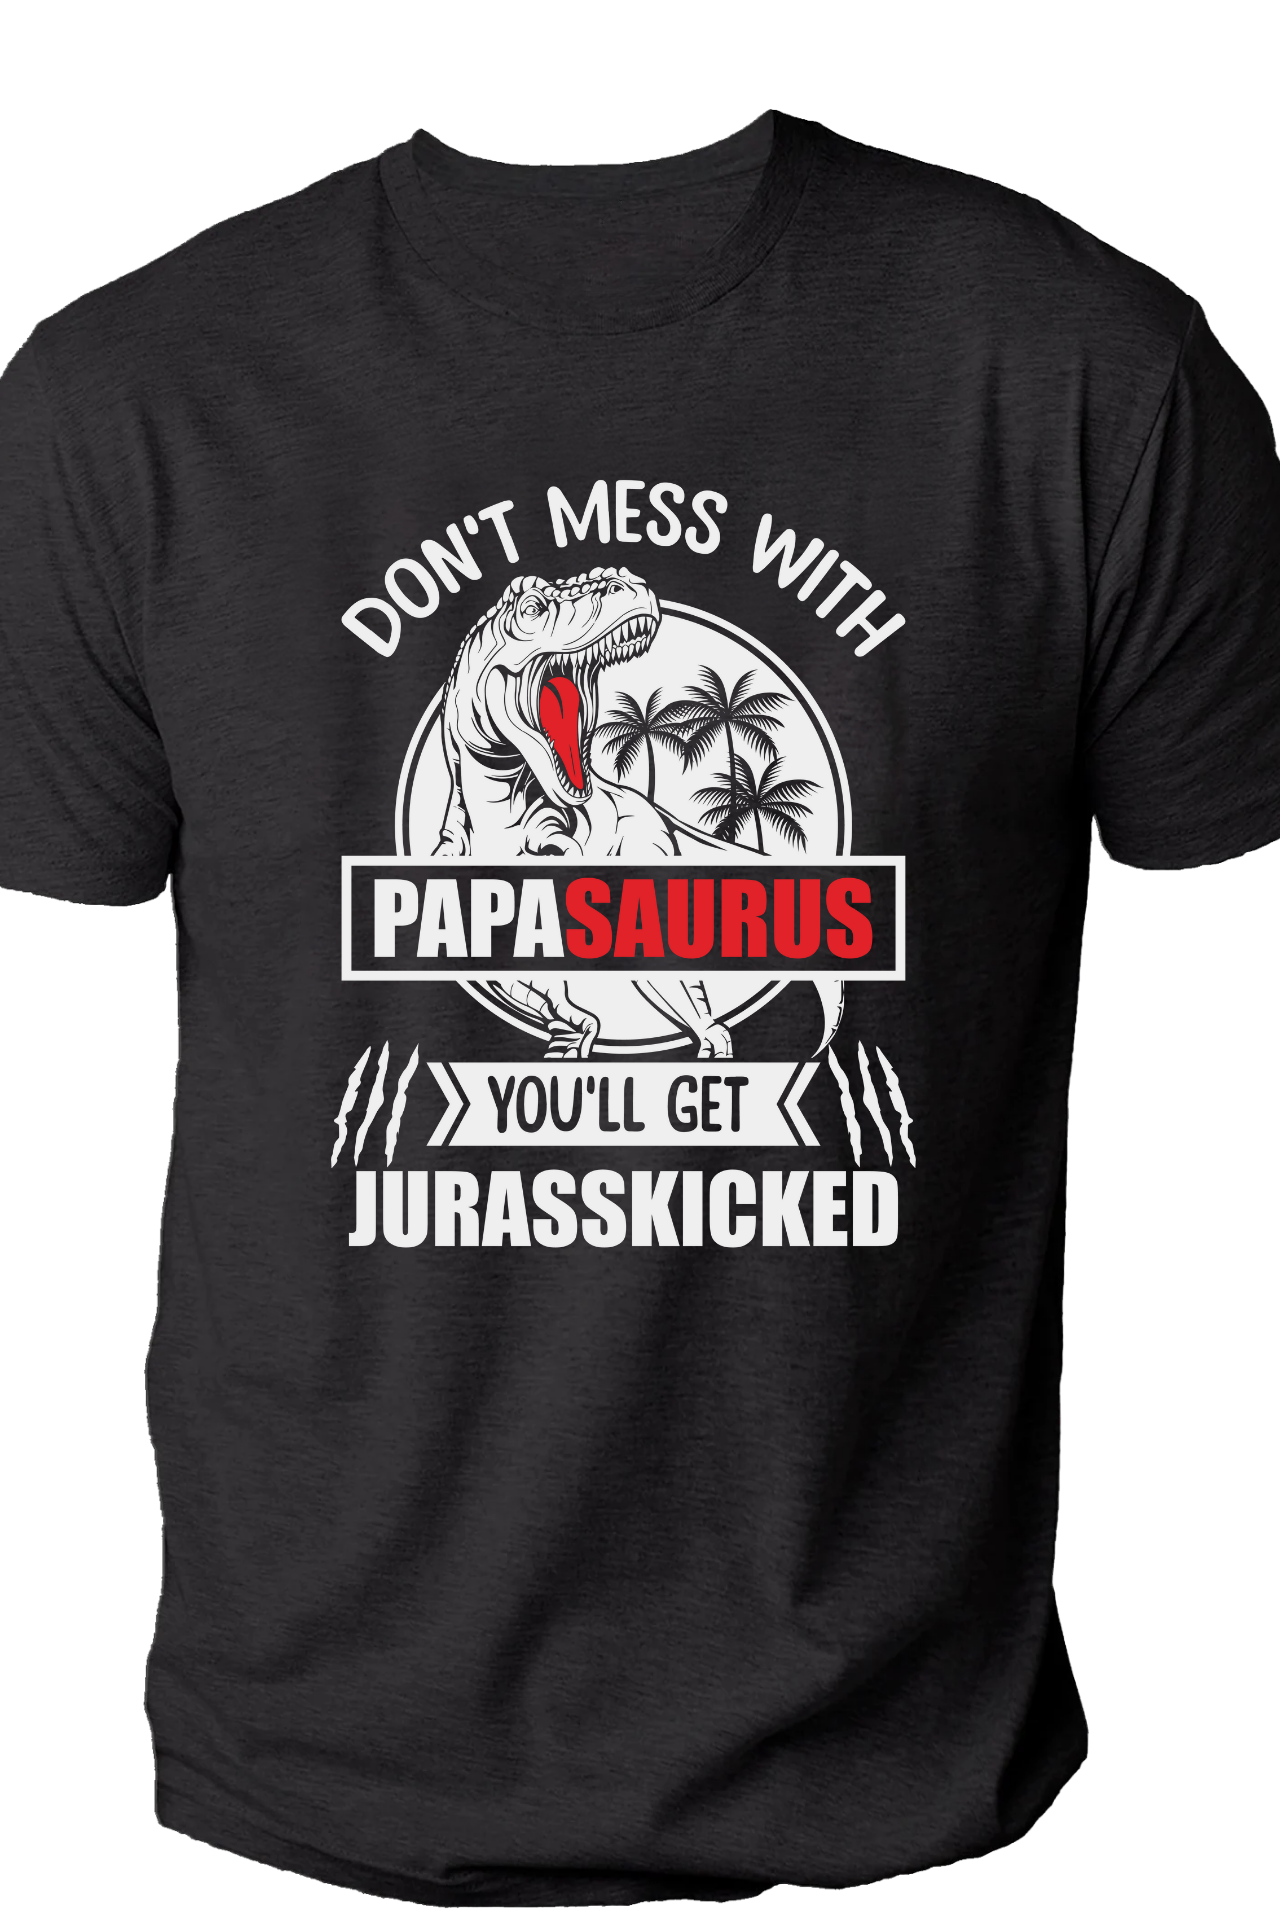 Don't Mess with Papasuarus TShirt